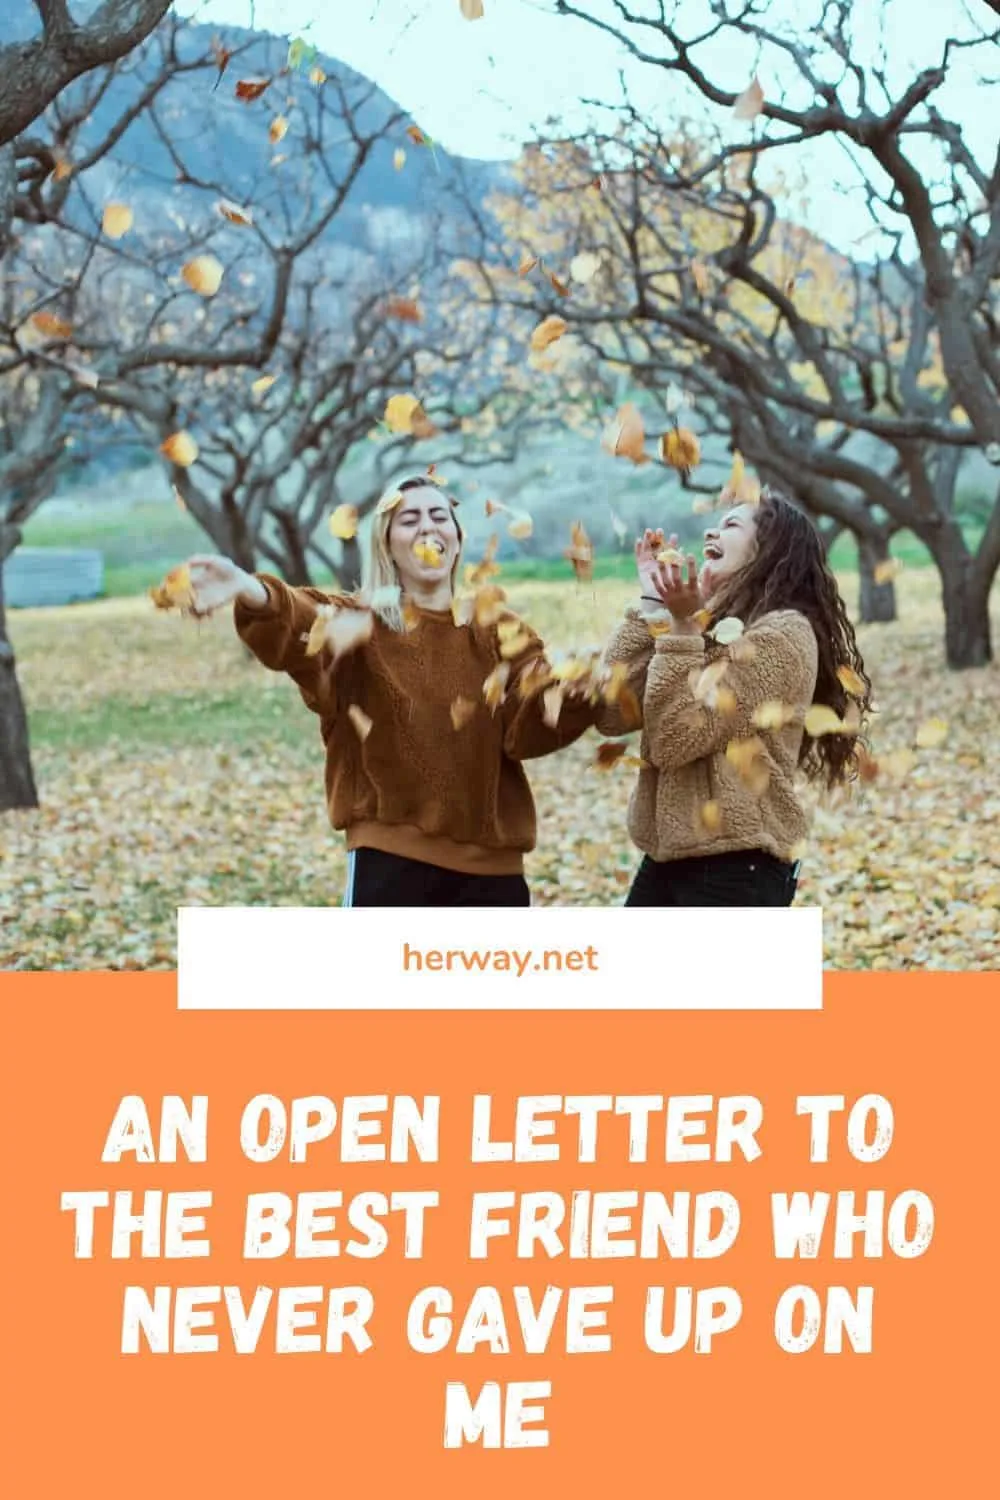 An Open Letter To The Best Friend Who Never Gave Up On Me